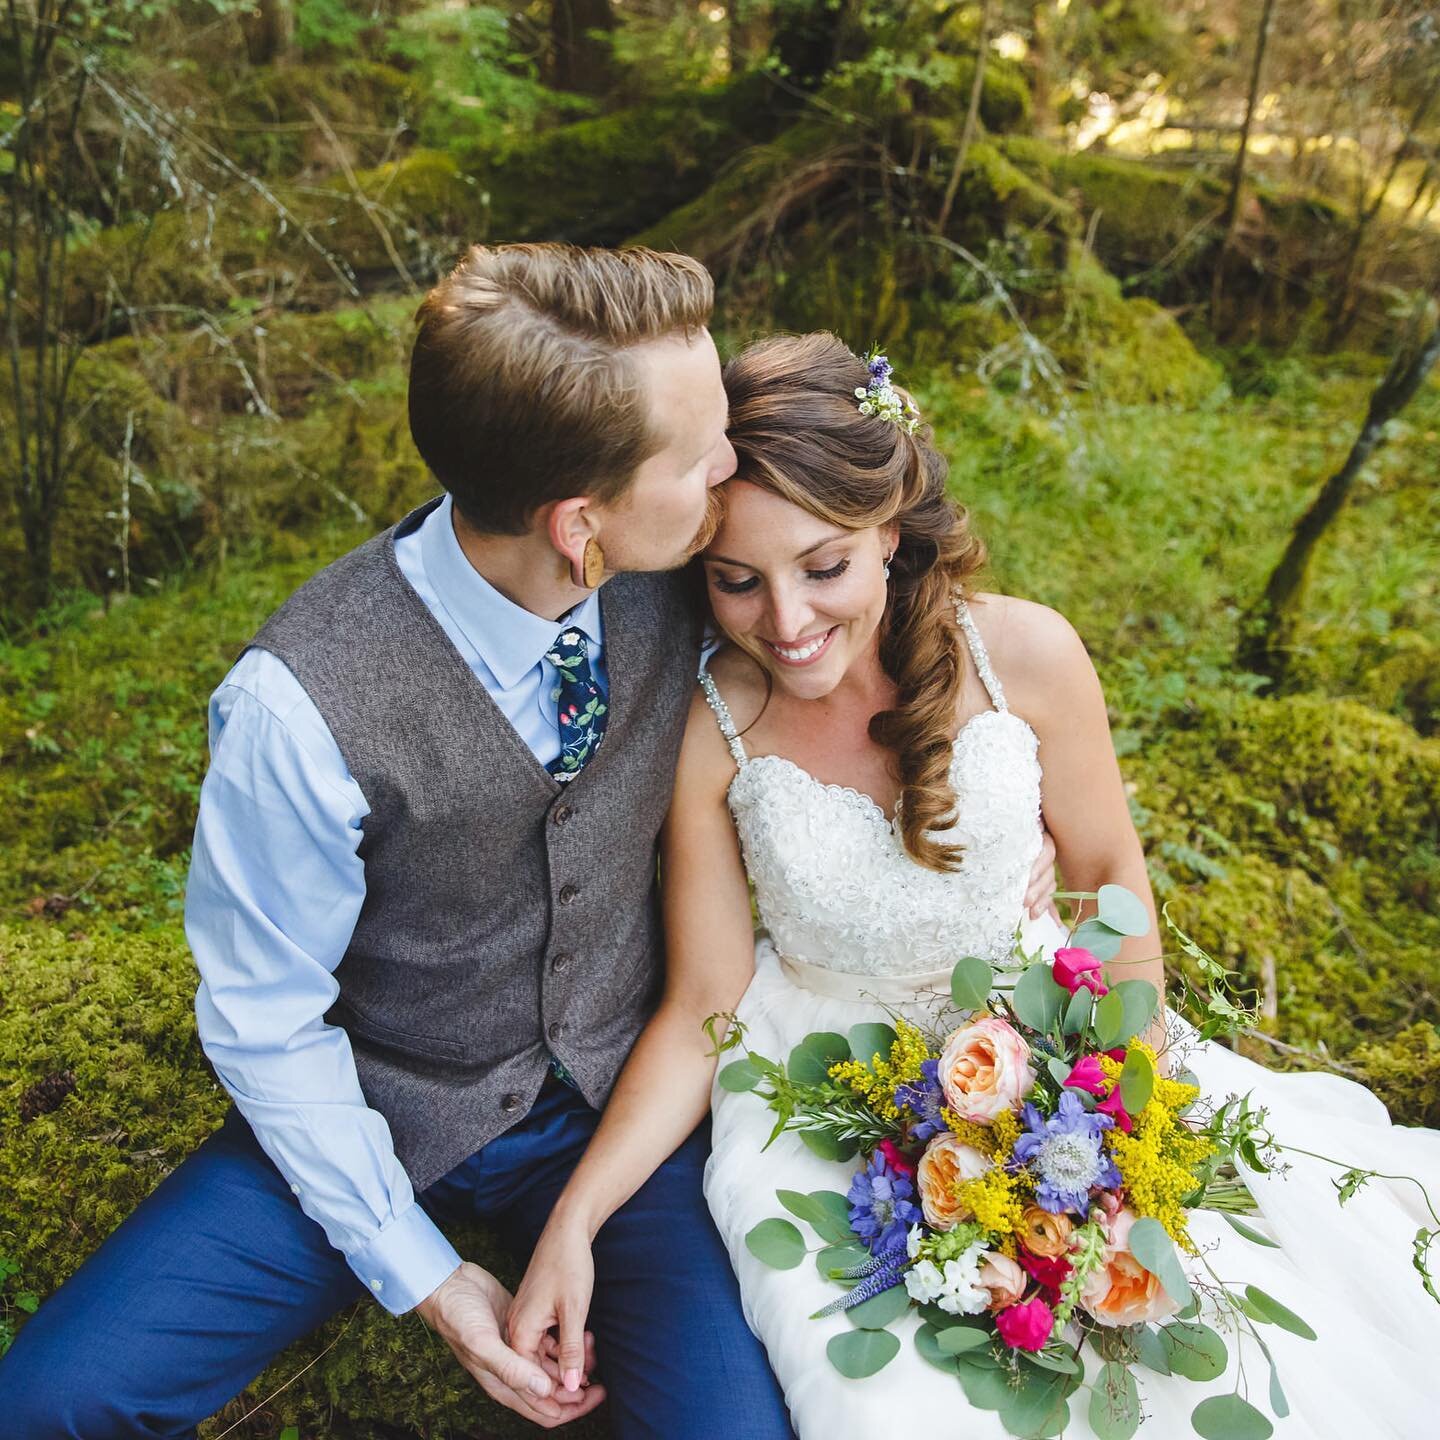 This amazing bouquet by @nestonorcas  was featured in #worldsbestweddingphotos this morning. What a treat to be able to venture into Moran State Park and find a secret mossy spot to nuzzle up in! Cindy at Nest is amazing.. She can pull off any color 